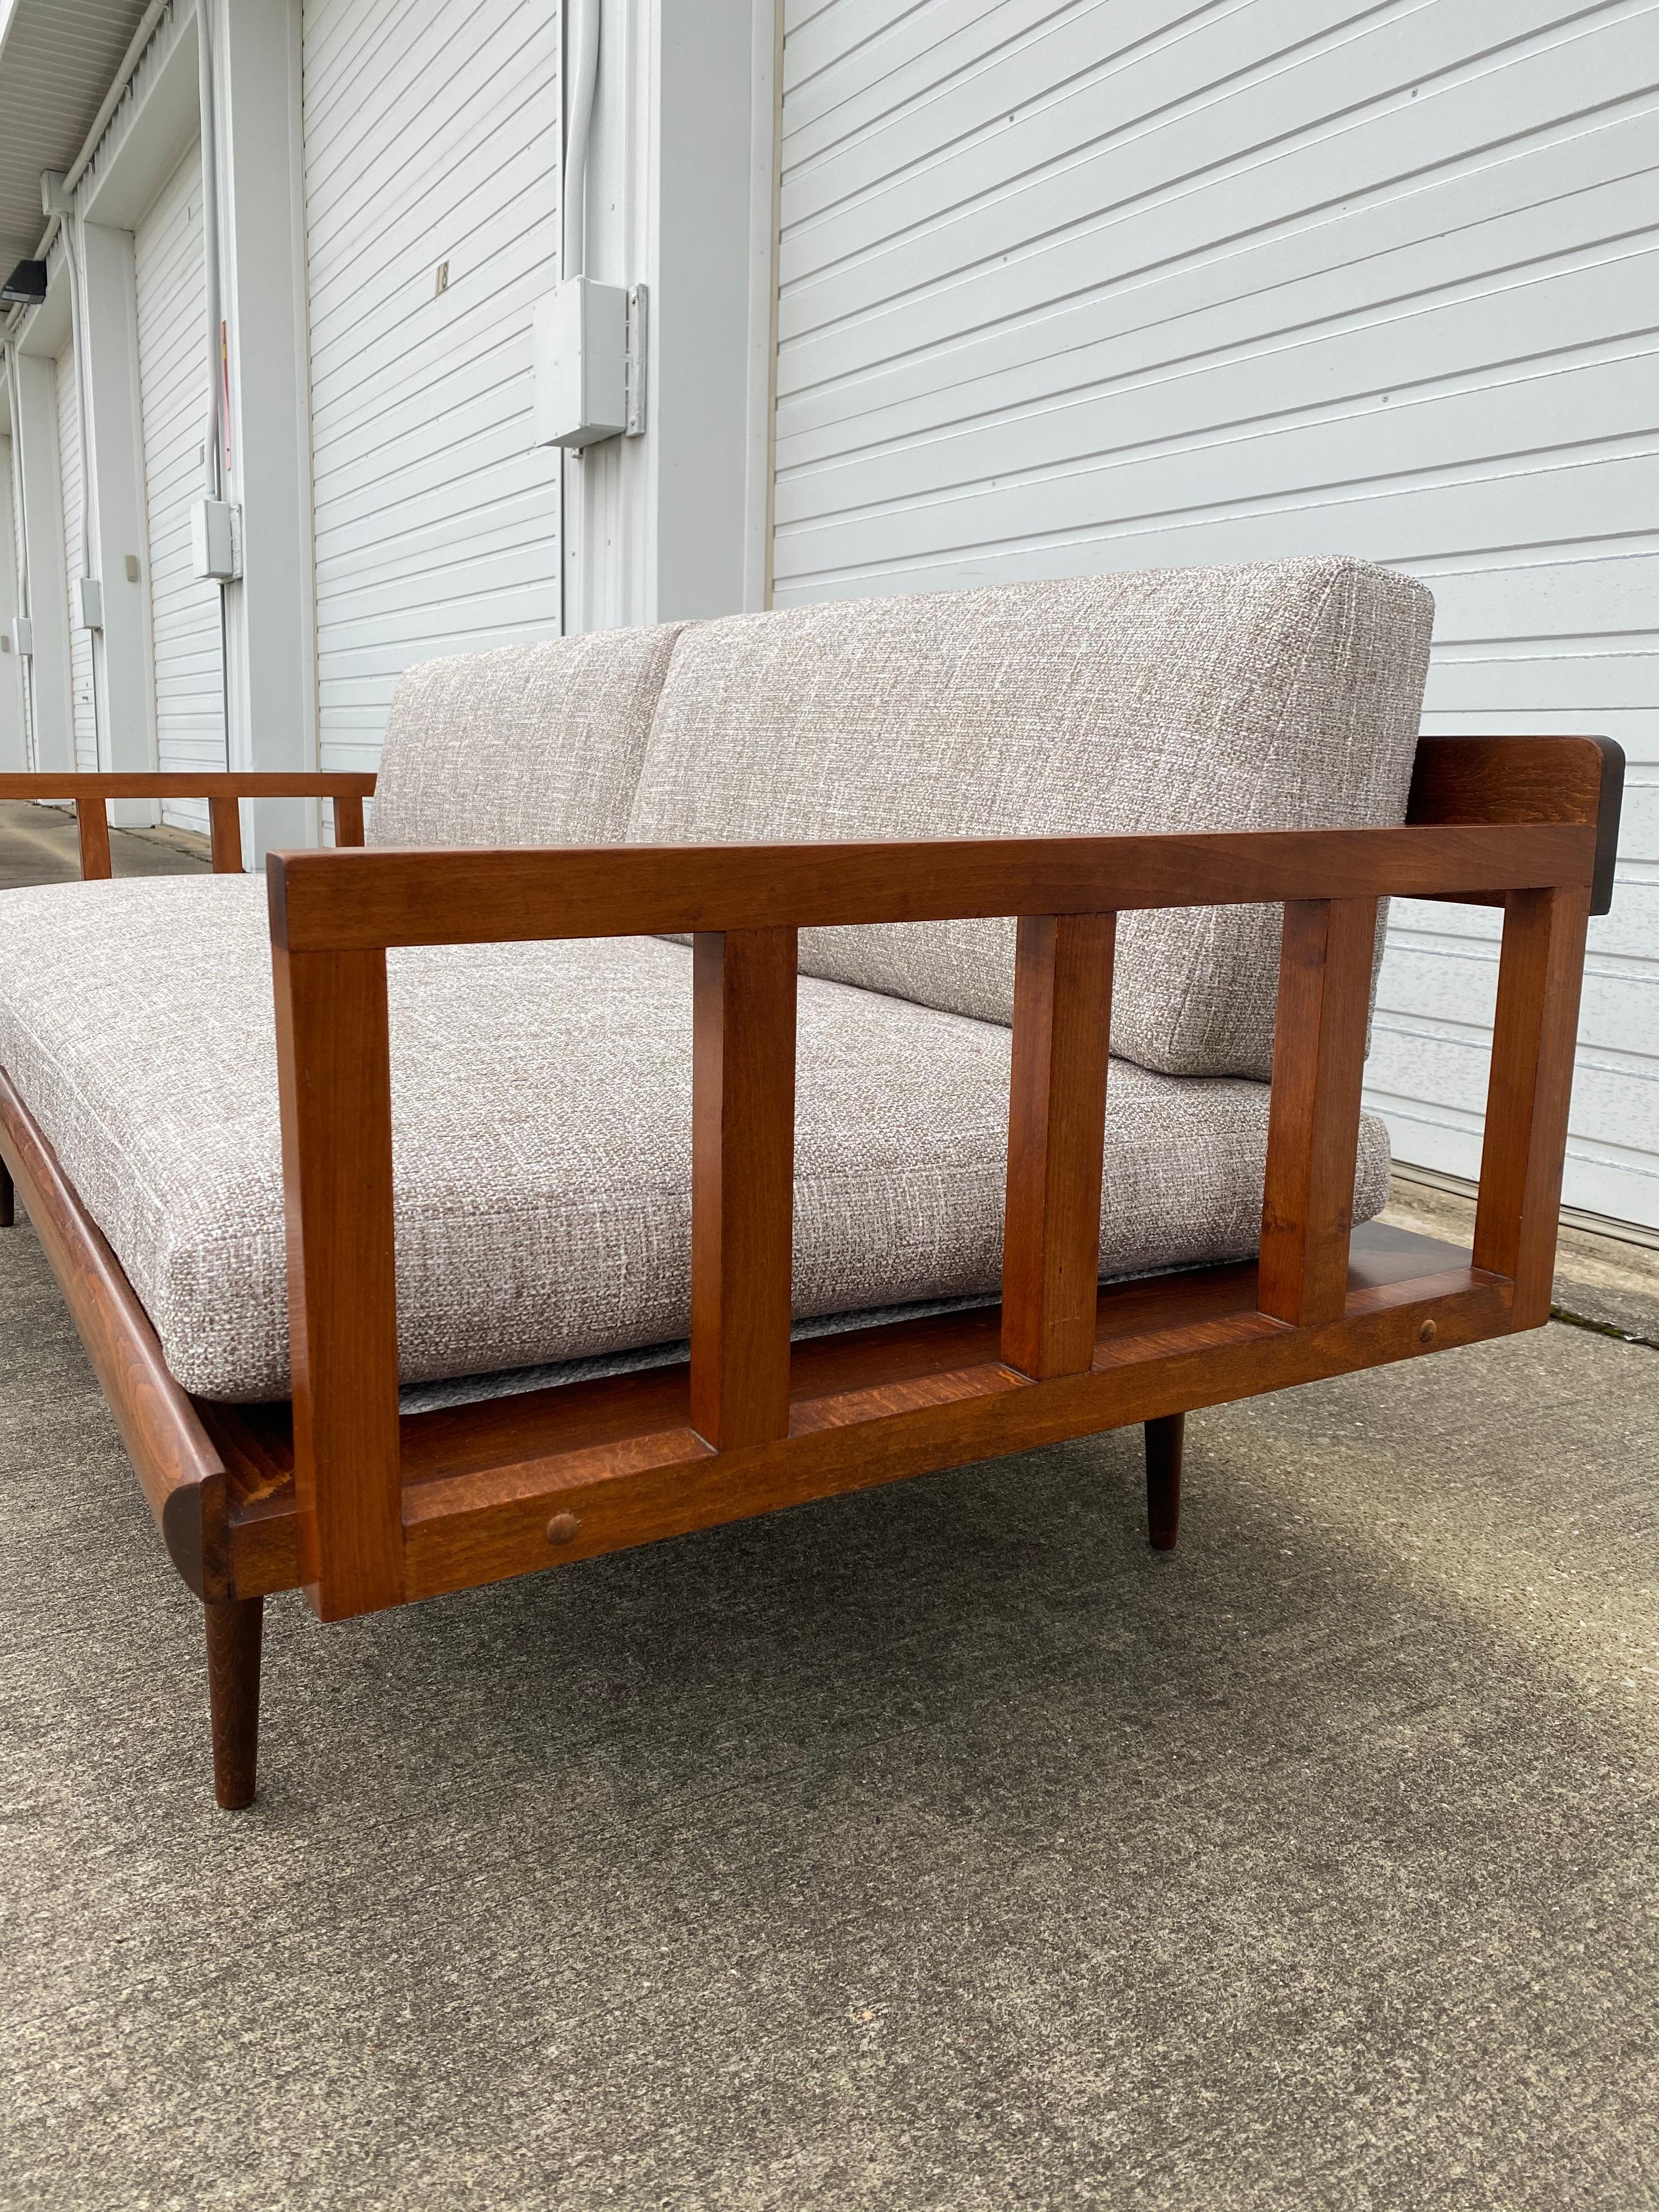 Fabric Reupholstered Yugoslavian Mid-century Modern Teak Daybed For Sale